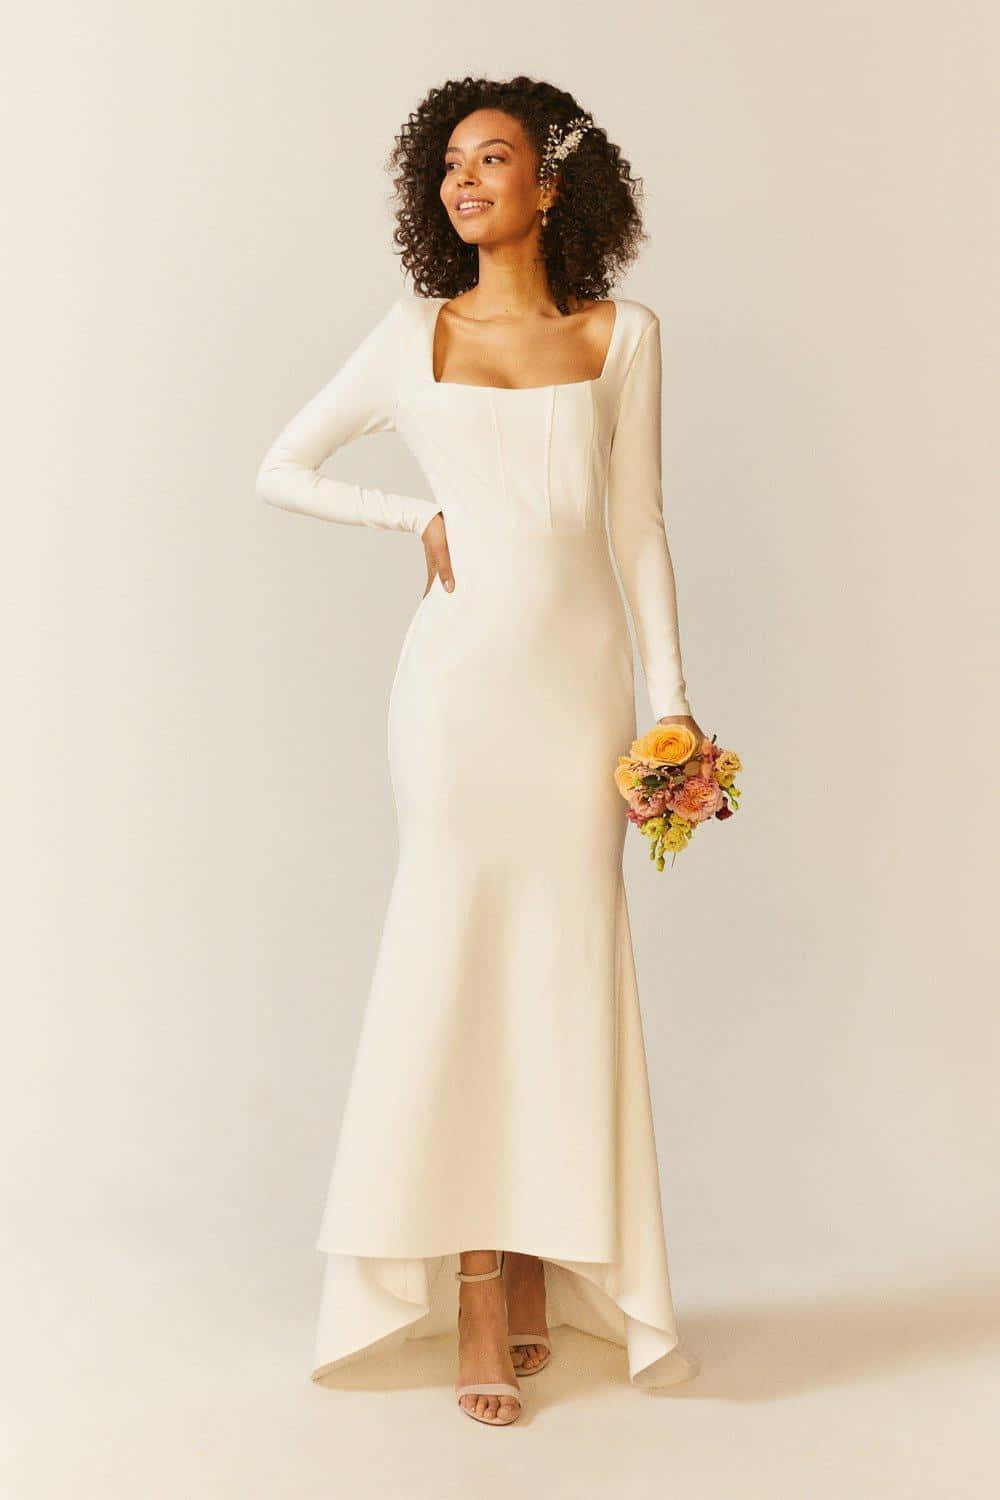 Black Woman In White Sleeved Long Dress Picture